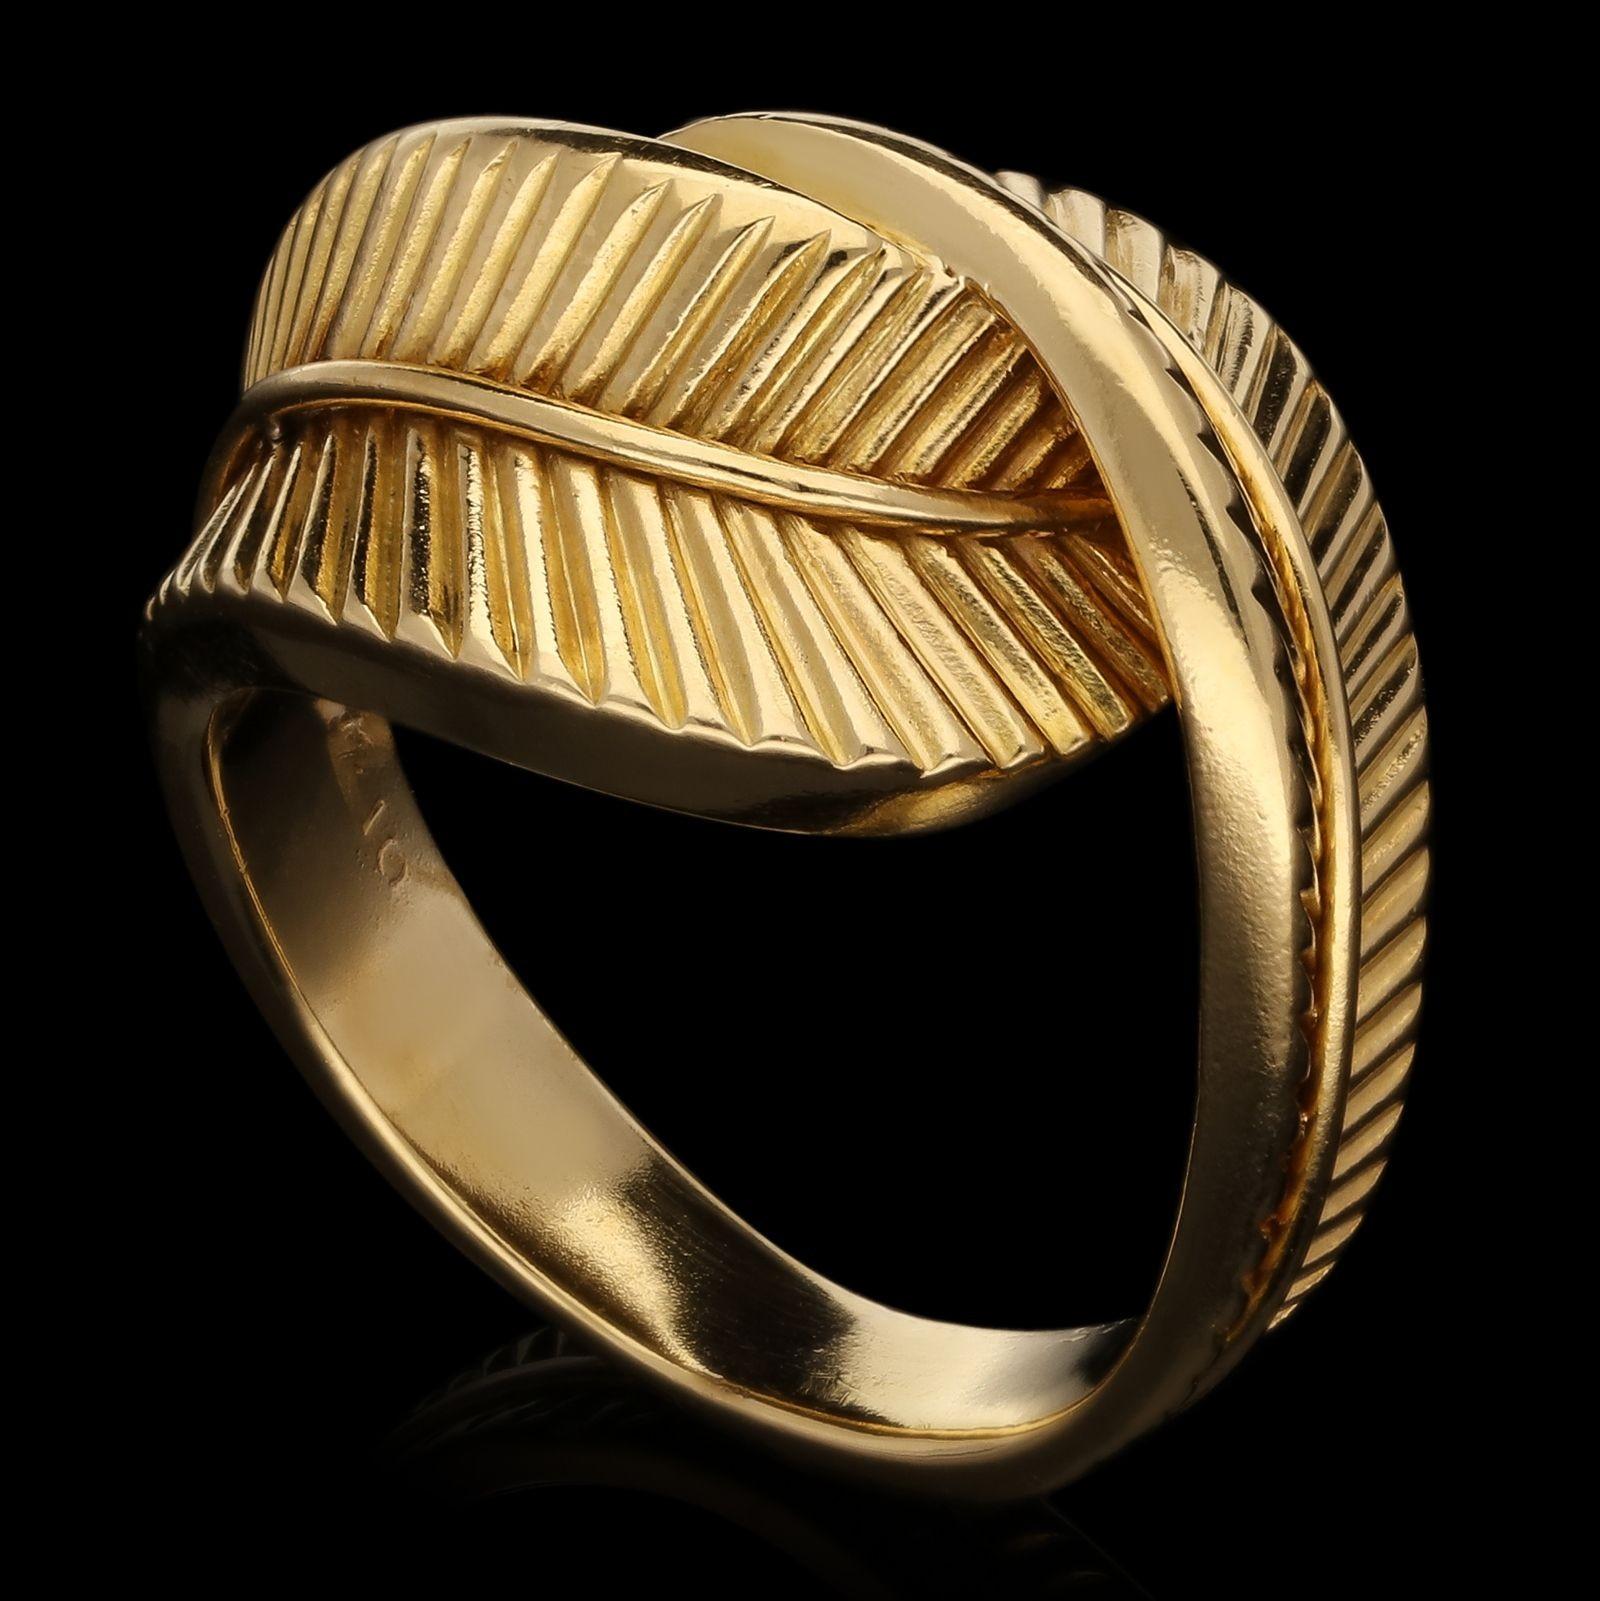 A stylish Retro vintage gold ring by Van Cleef and Arpels c.1960s, designed as a wraparound cross over stylised leaf with reeded markings and bold three dimensional profile. This wonderful ring was part of the ‘la boutique’ collection of jewellery